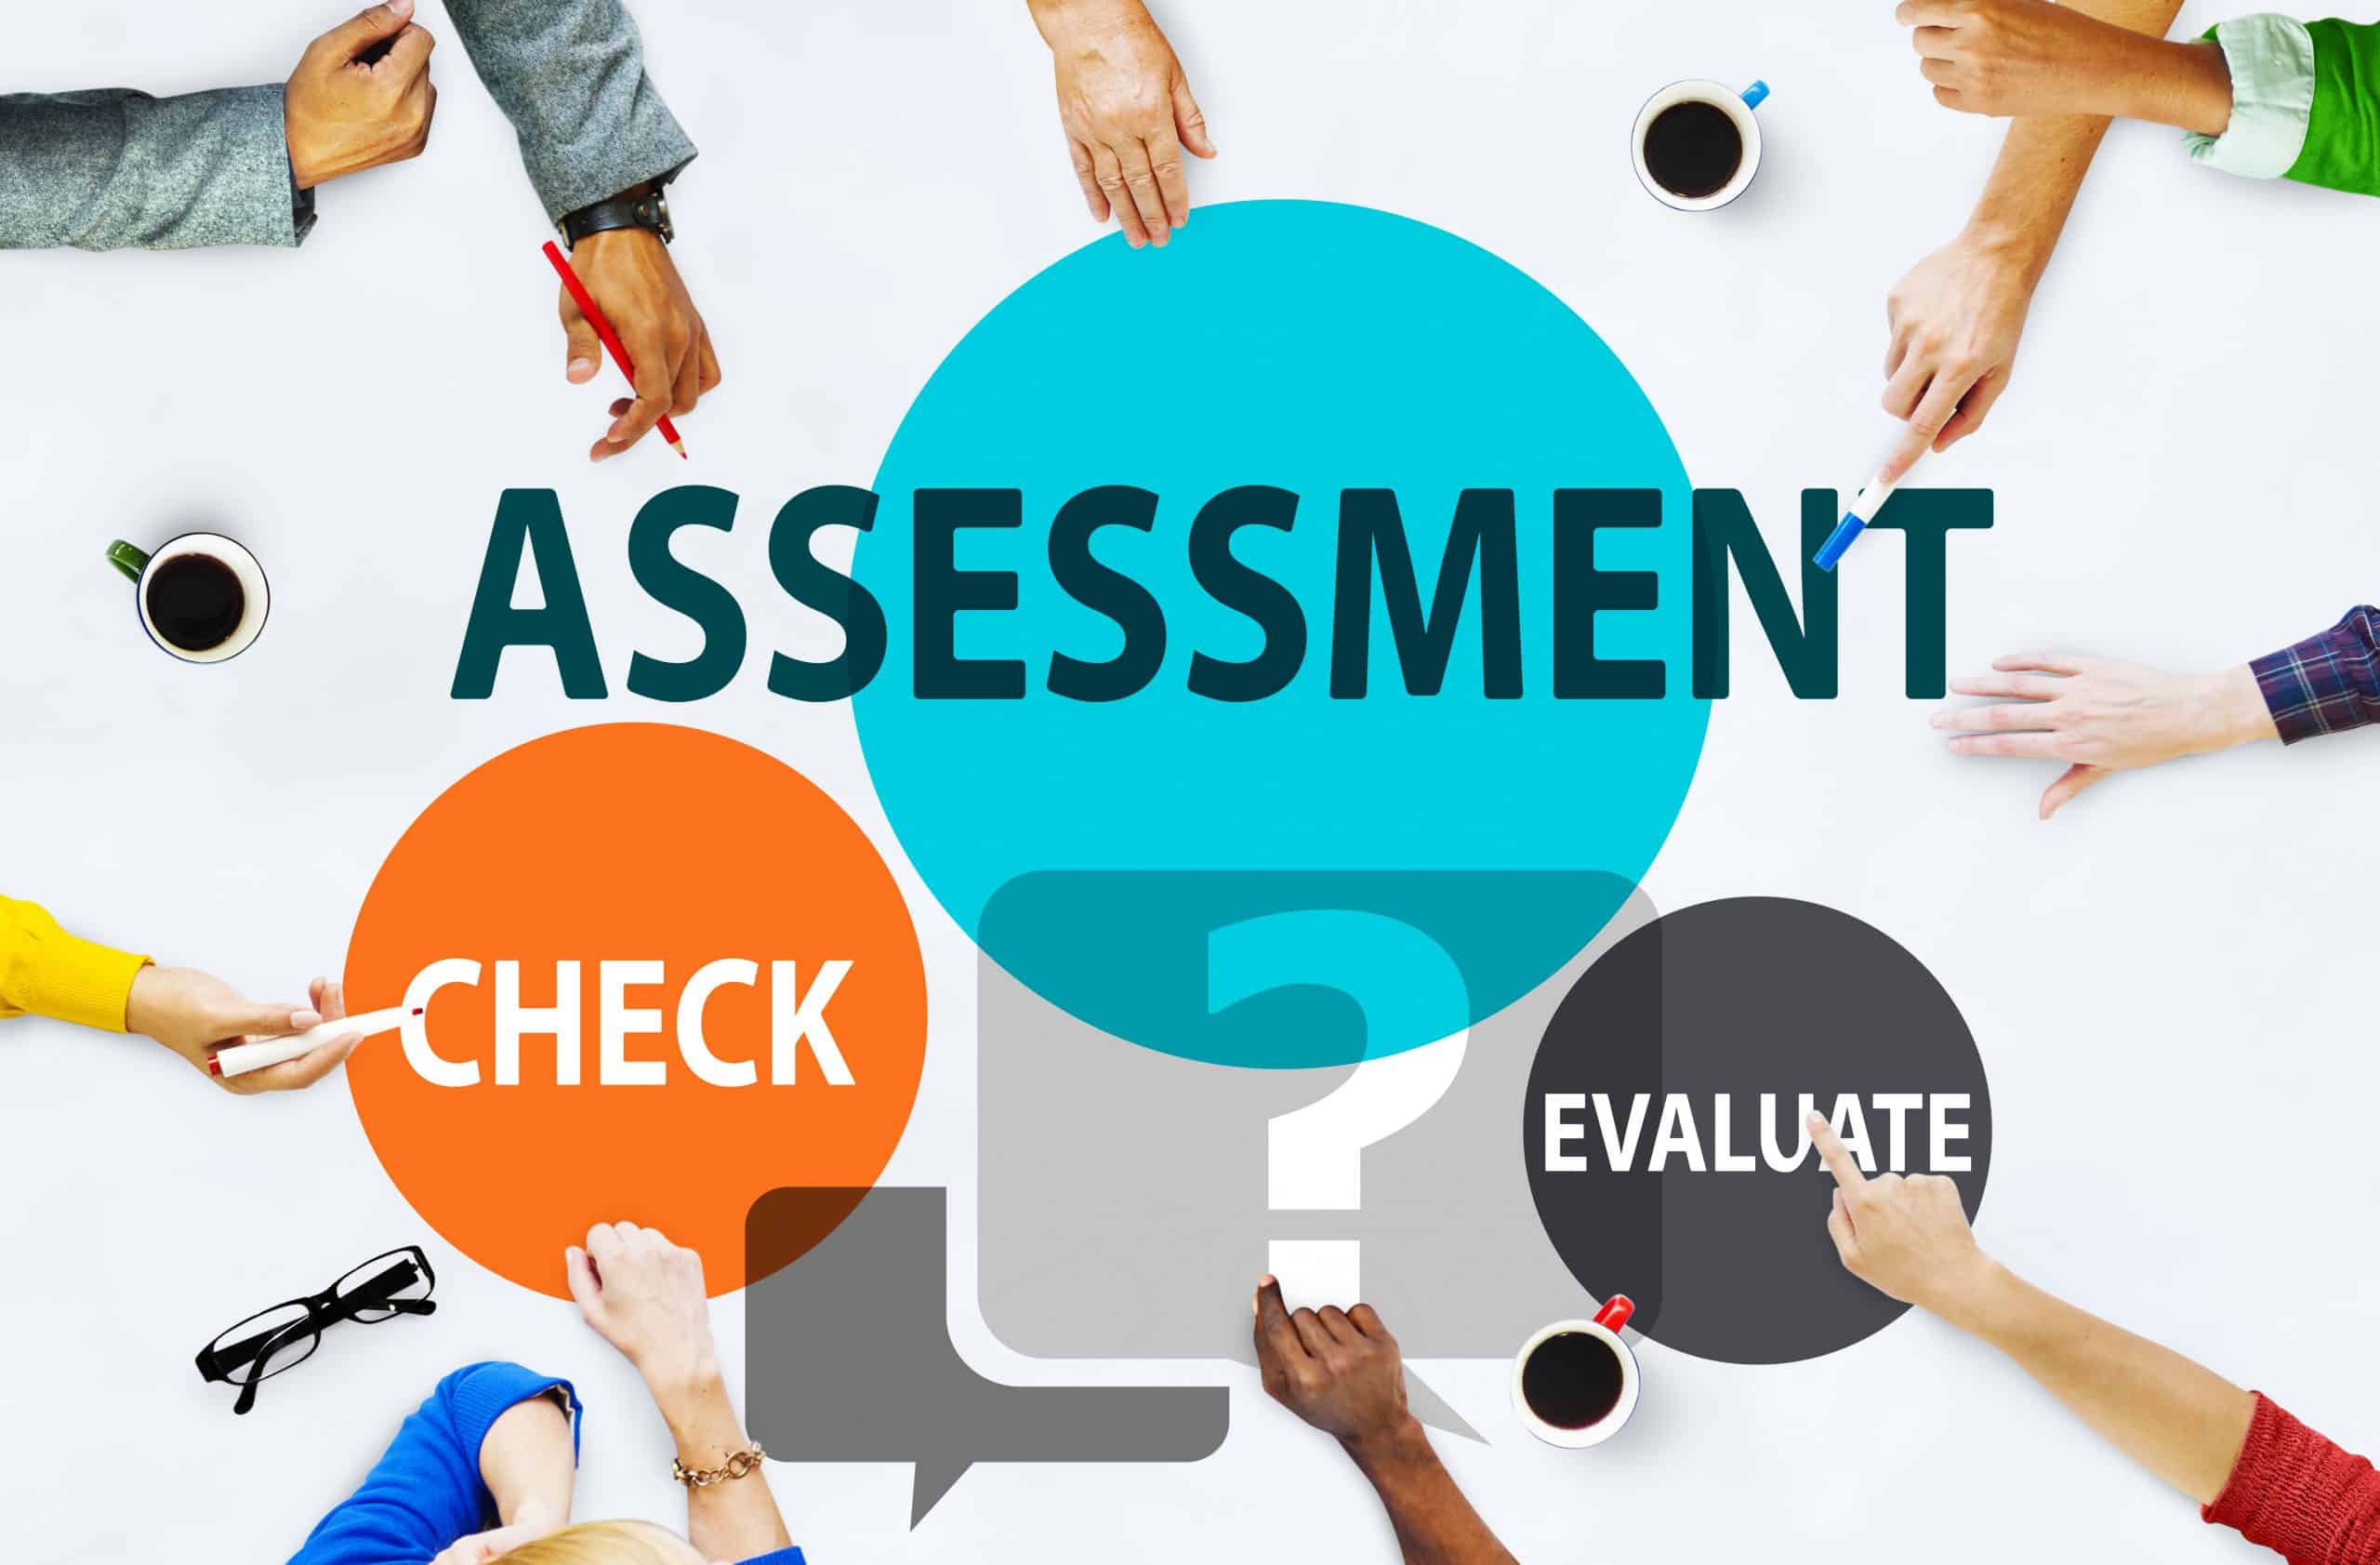 an introduction to good presentation practices assessment